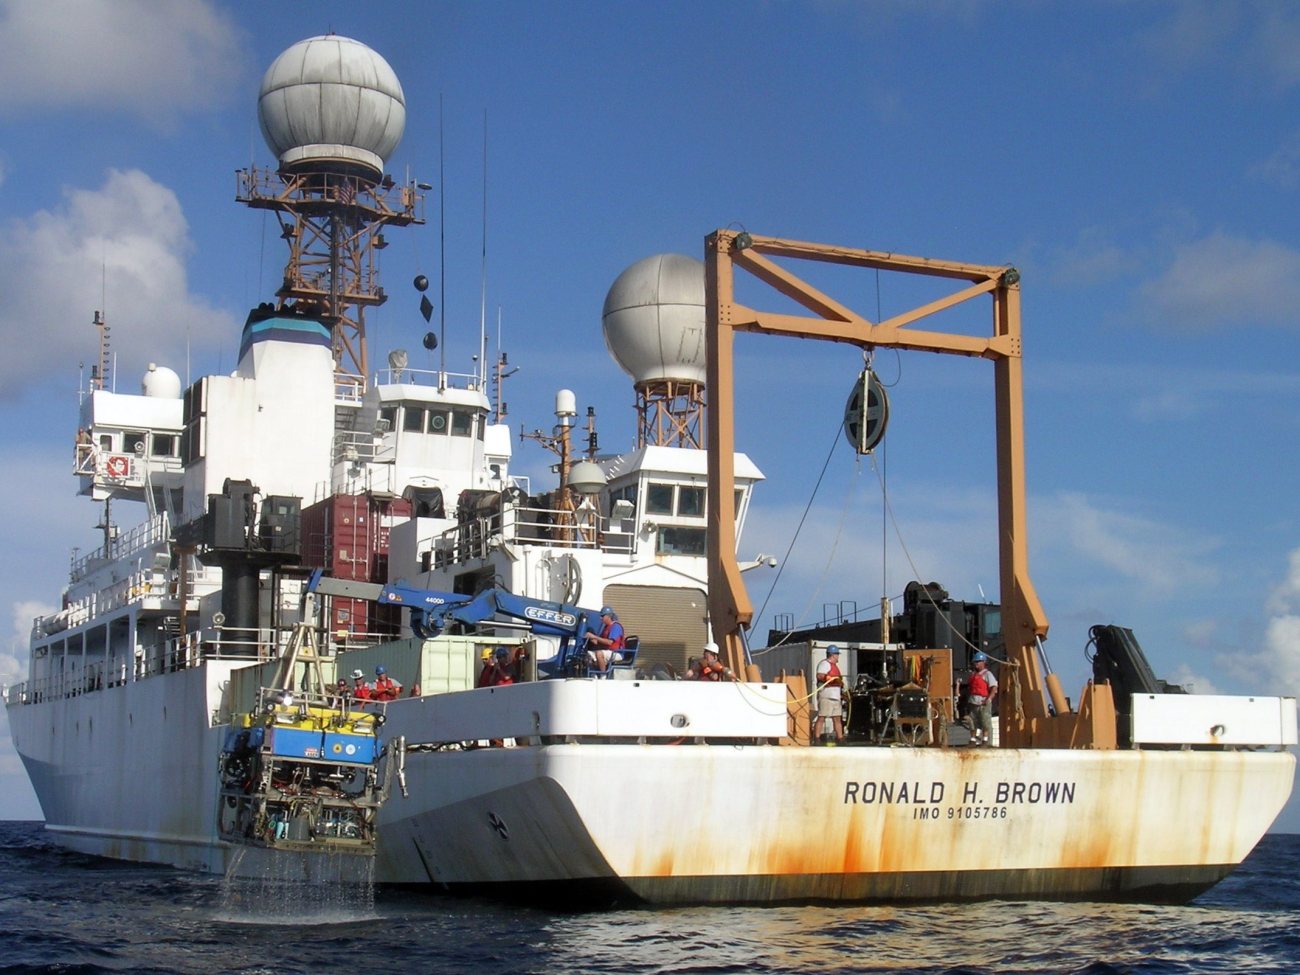 Stern view of NOAA Ship RONALD H